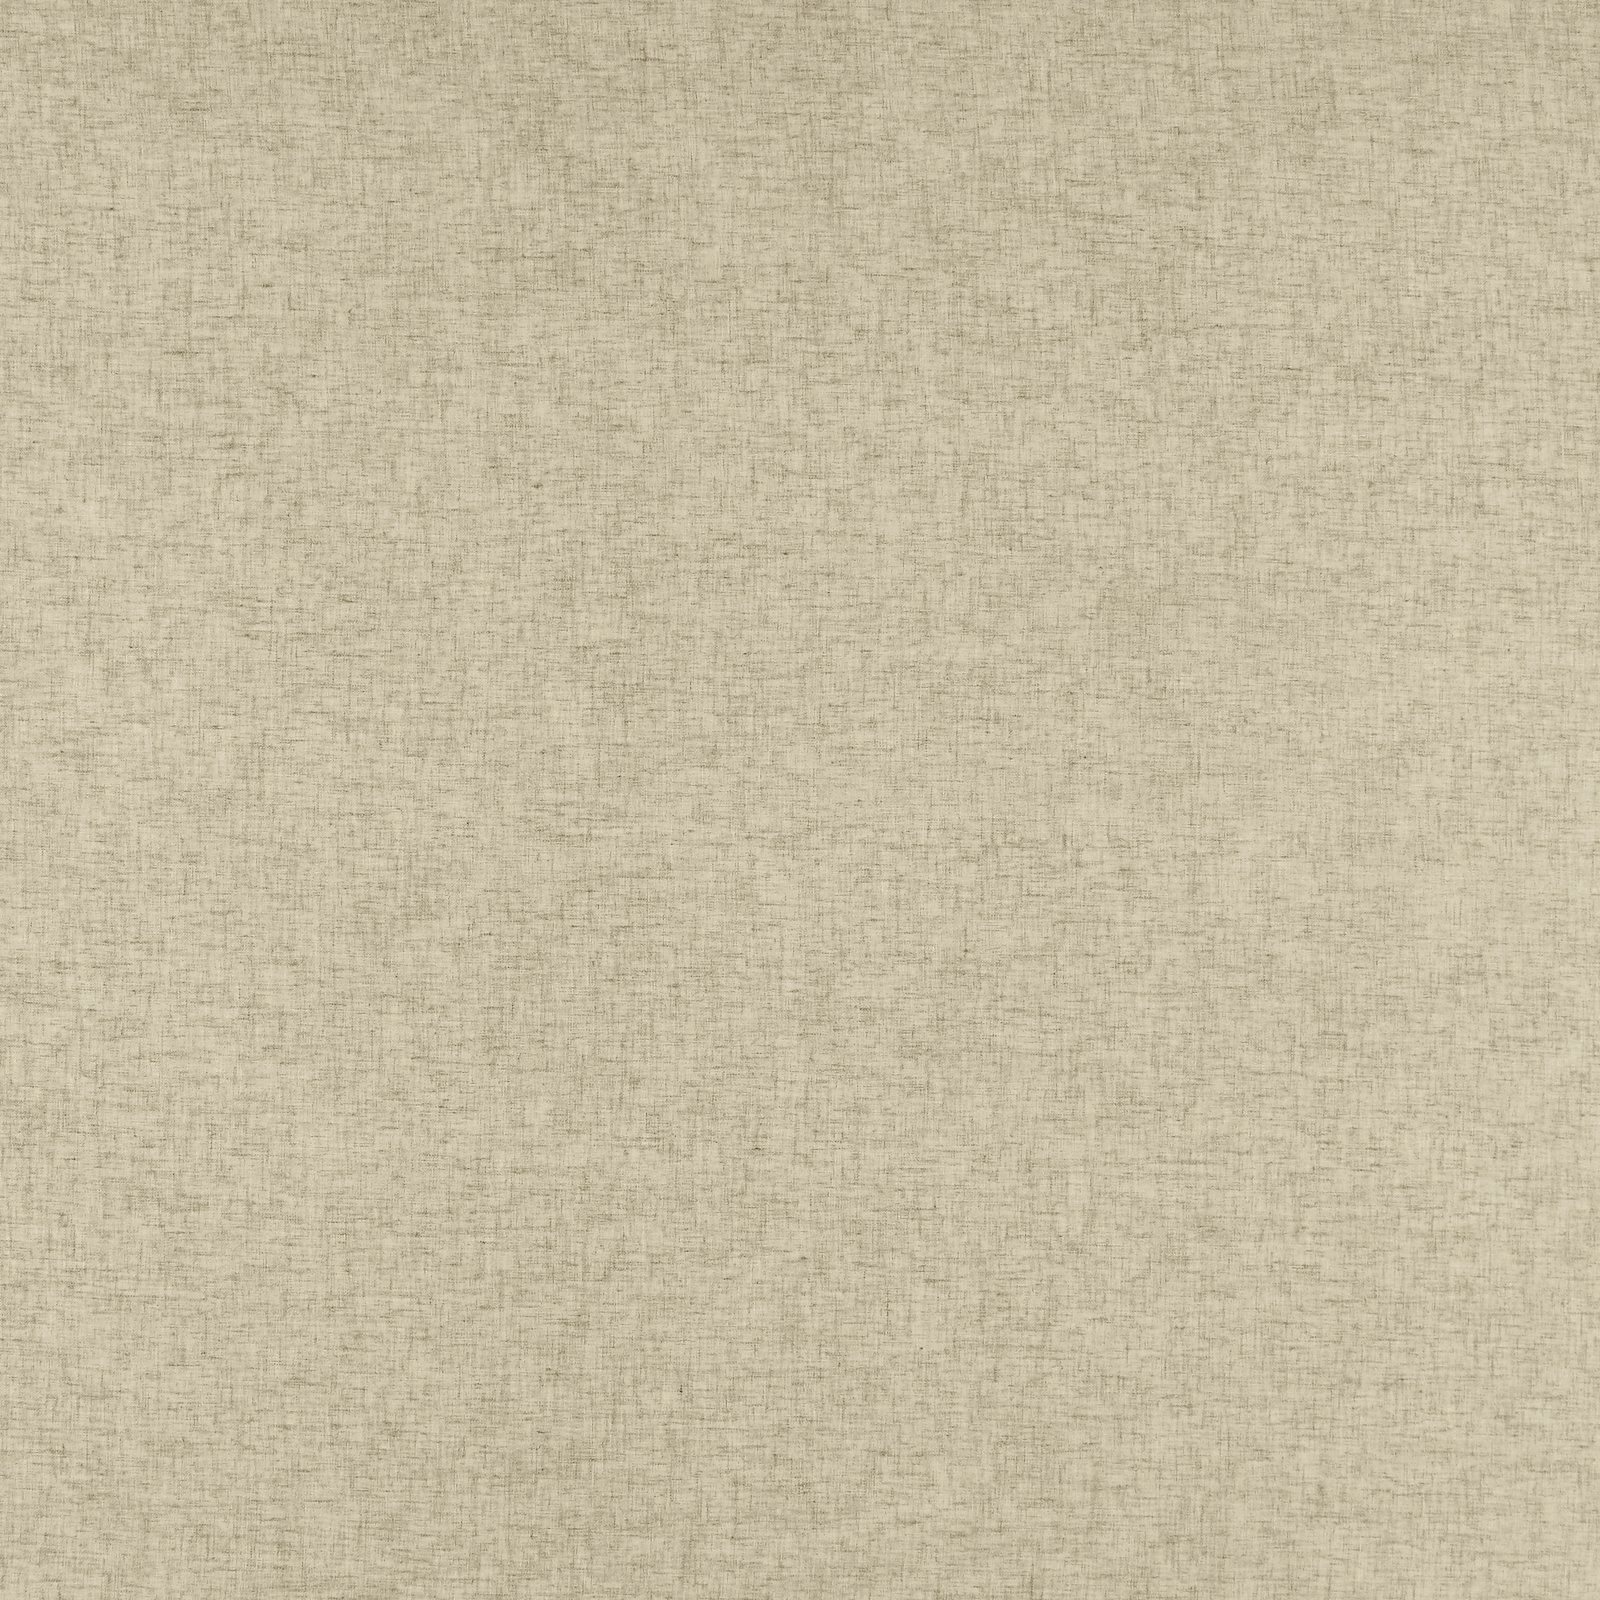 Voile mörk natur polyester/lin mix 295-300cm 835196_pack_solid